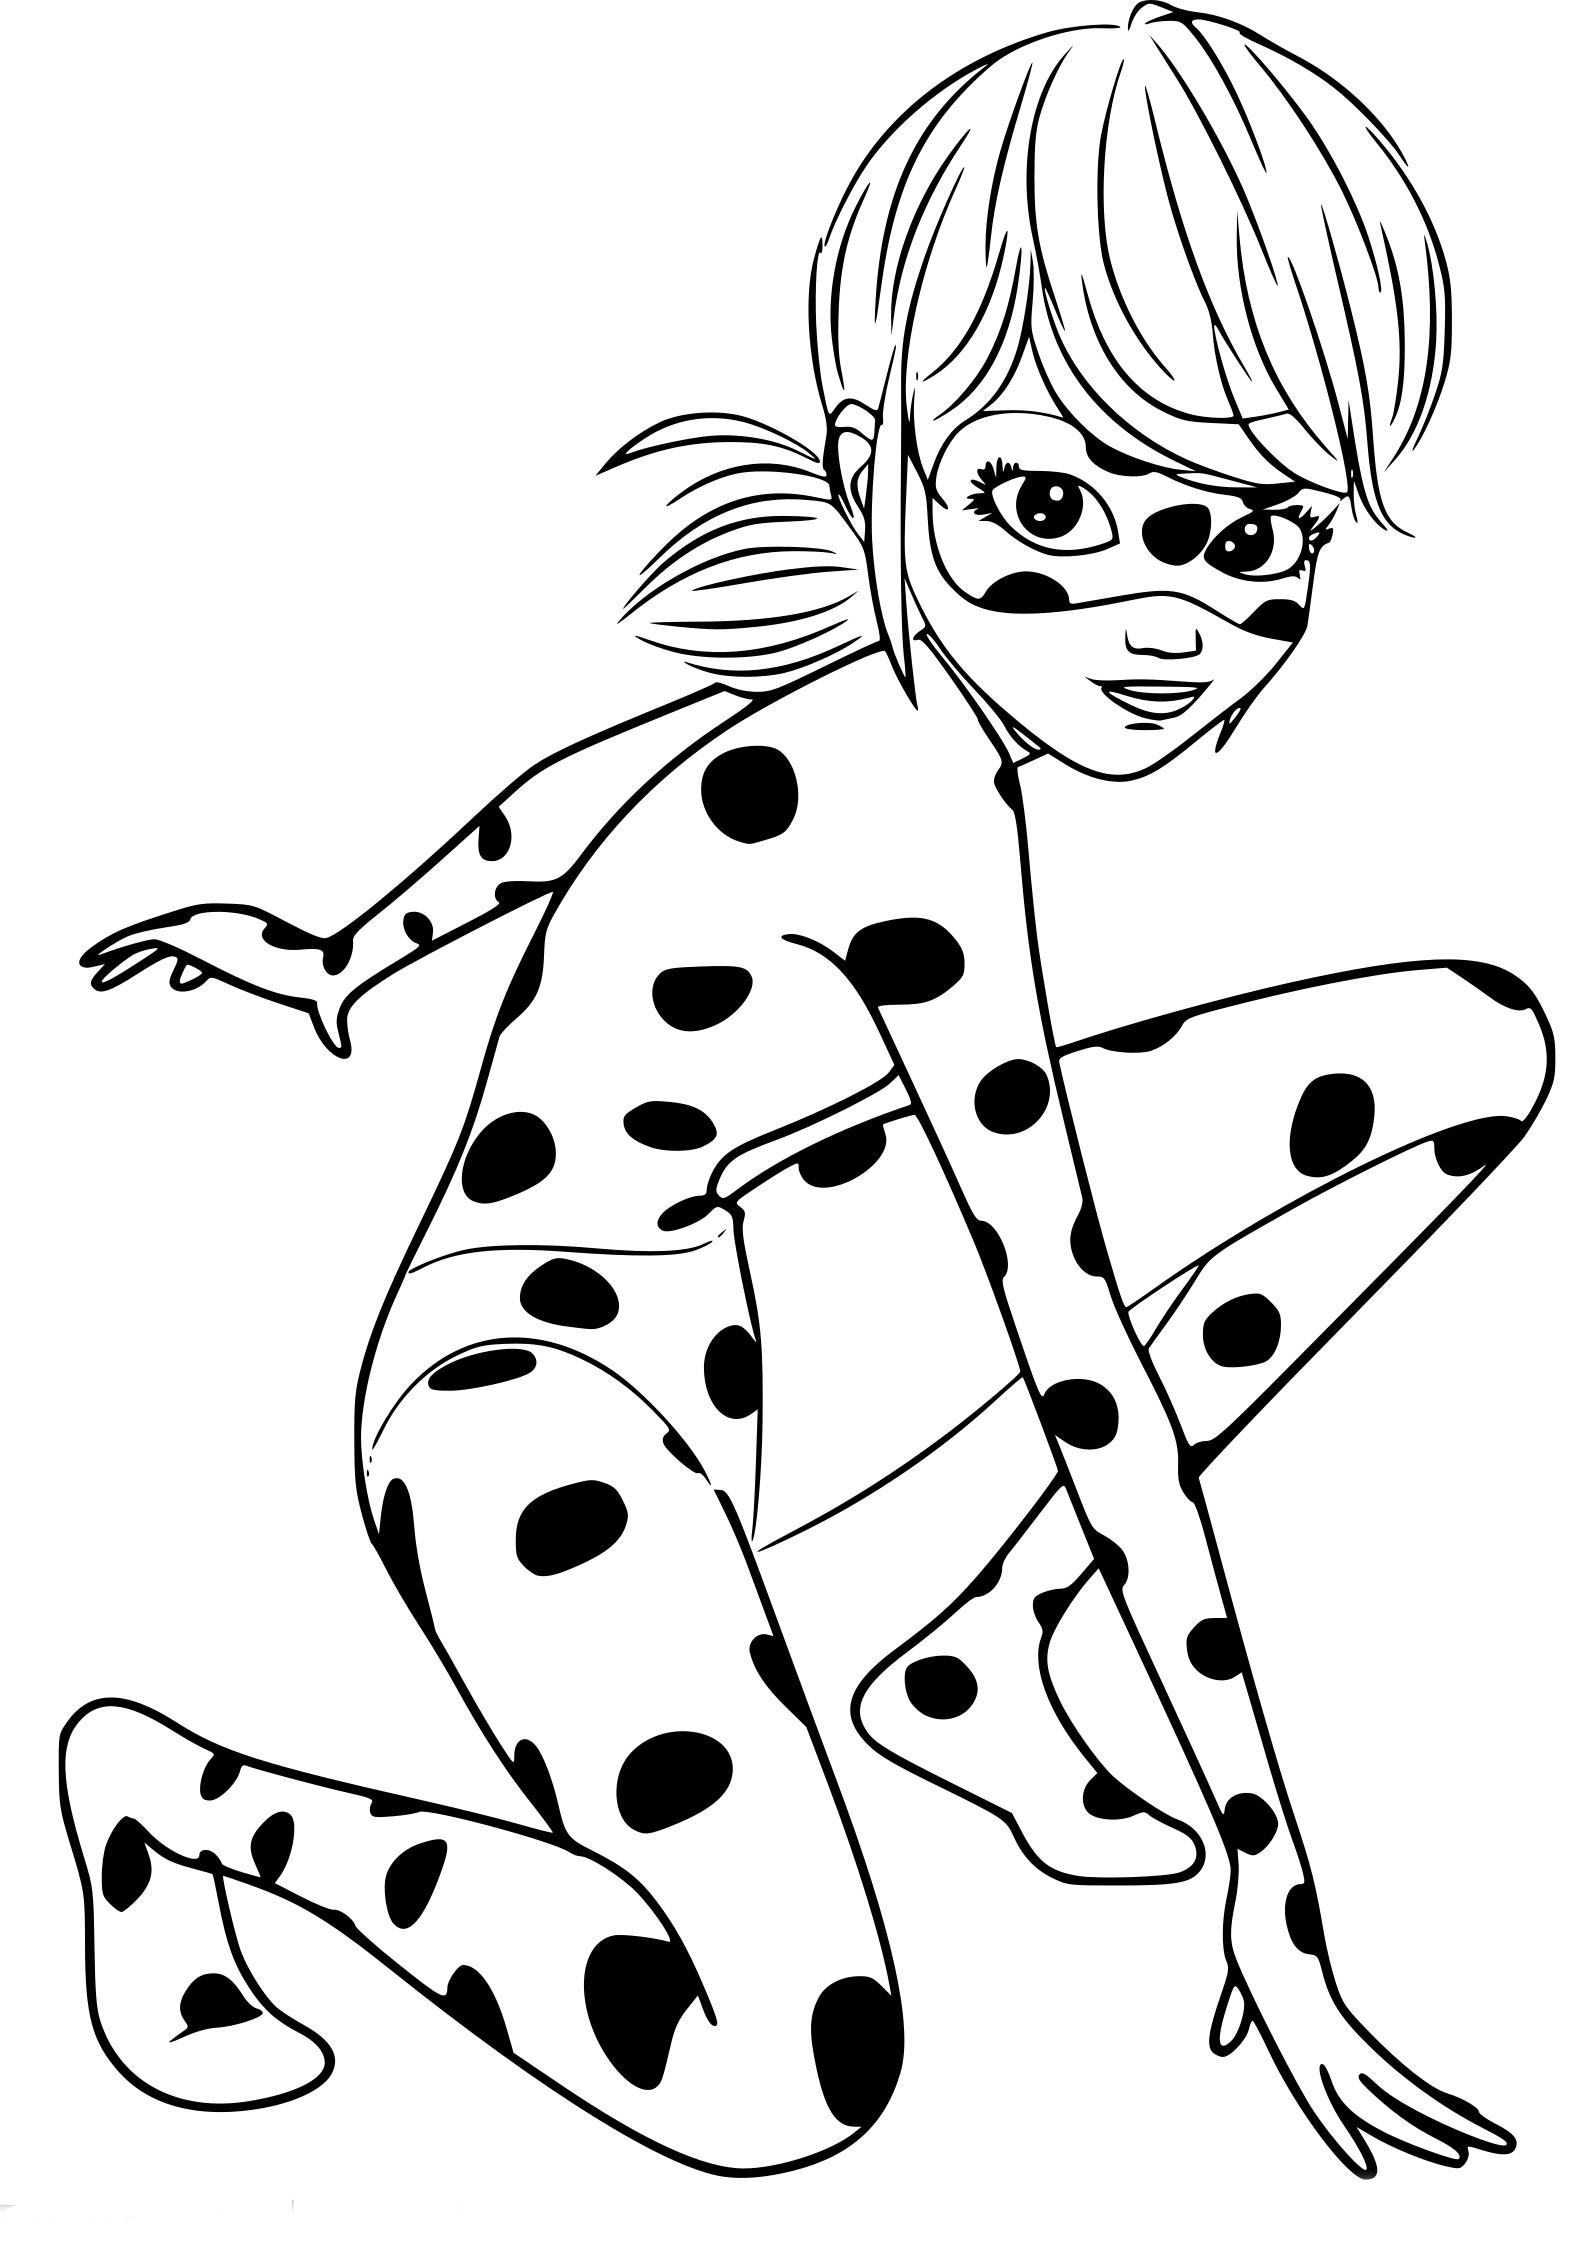 Miraculous Ladybug Coloring Pages Printable
 Miraculous Ladybug coloring pages YouLoveIt